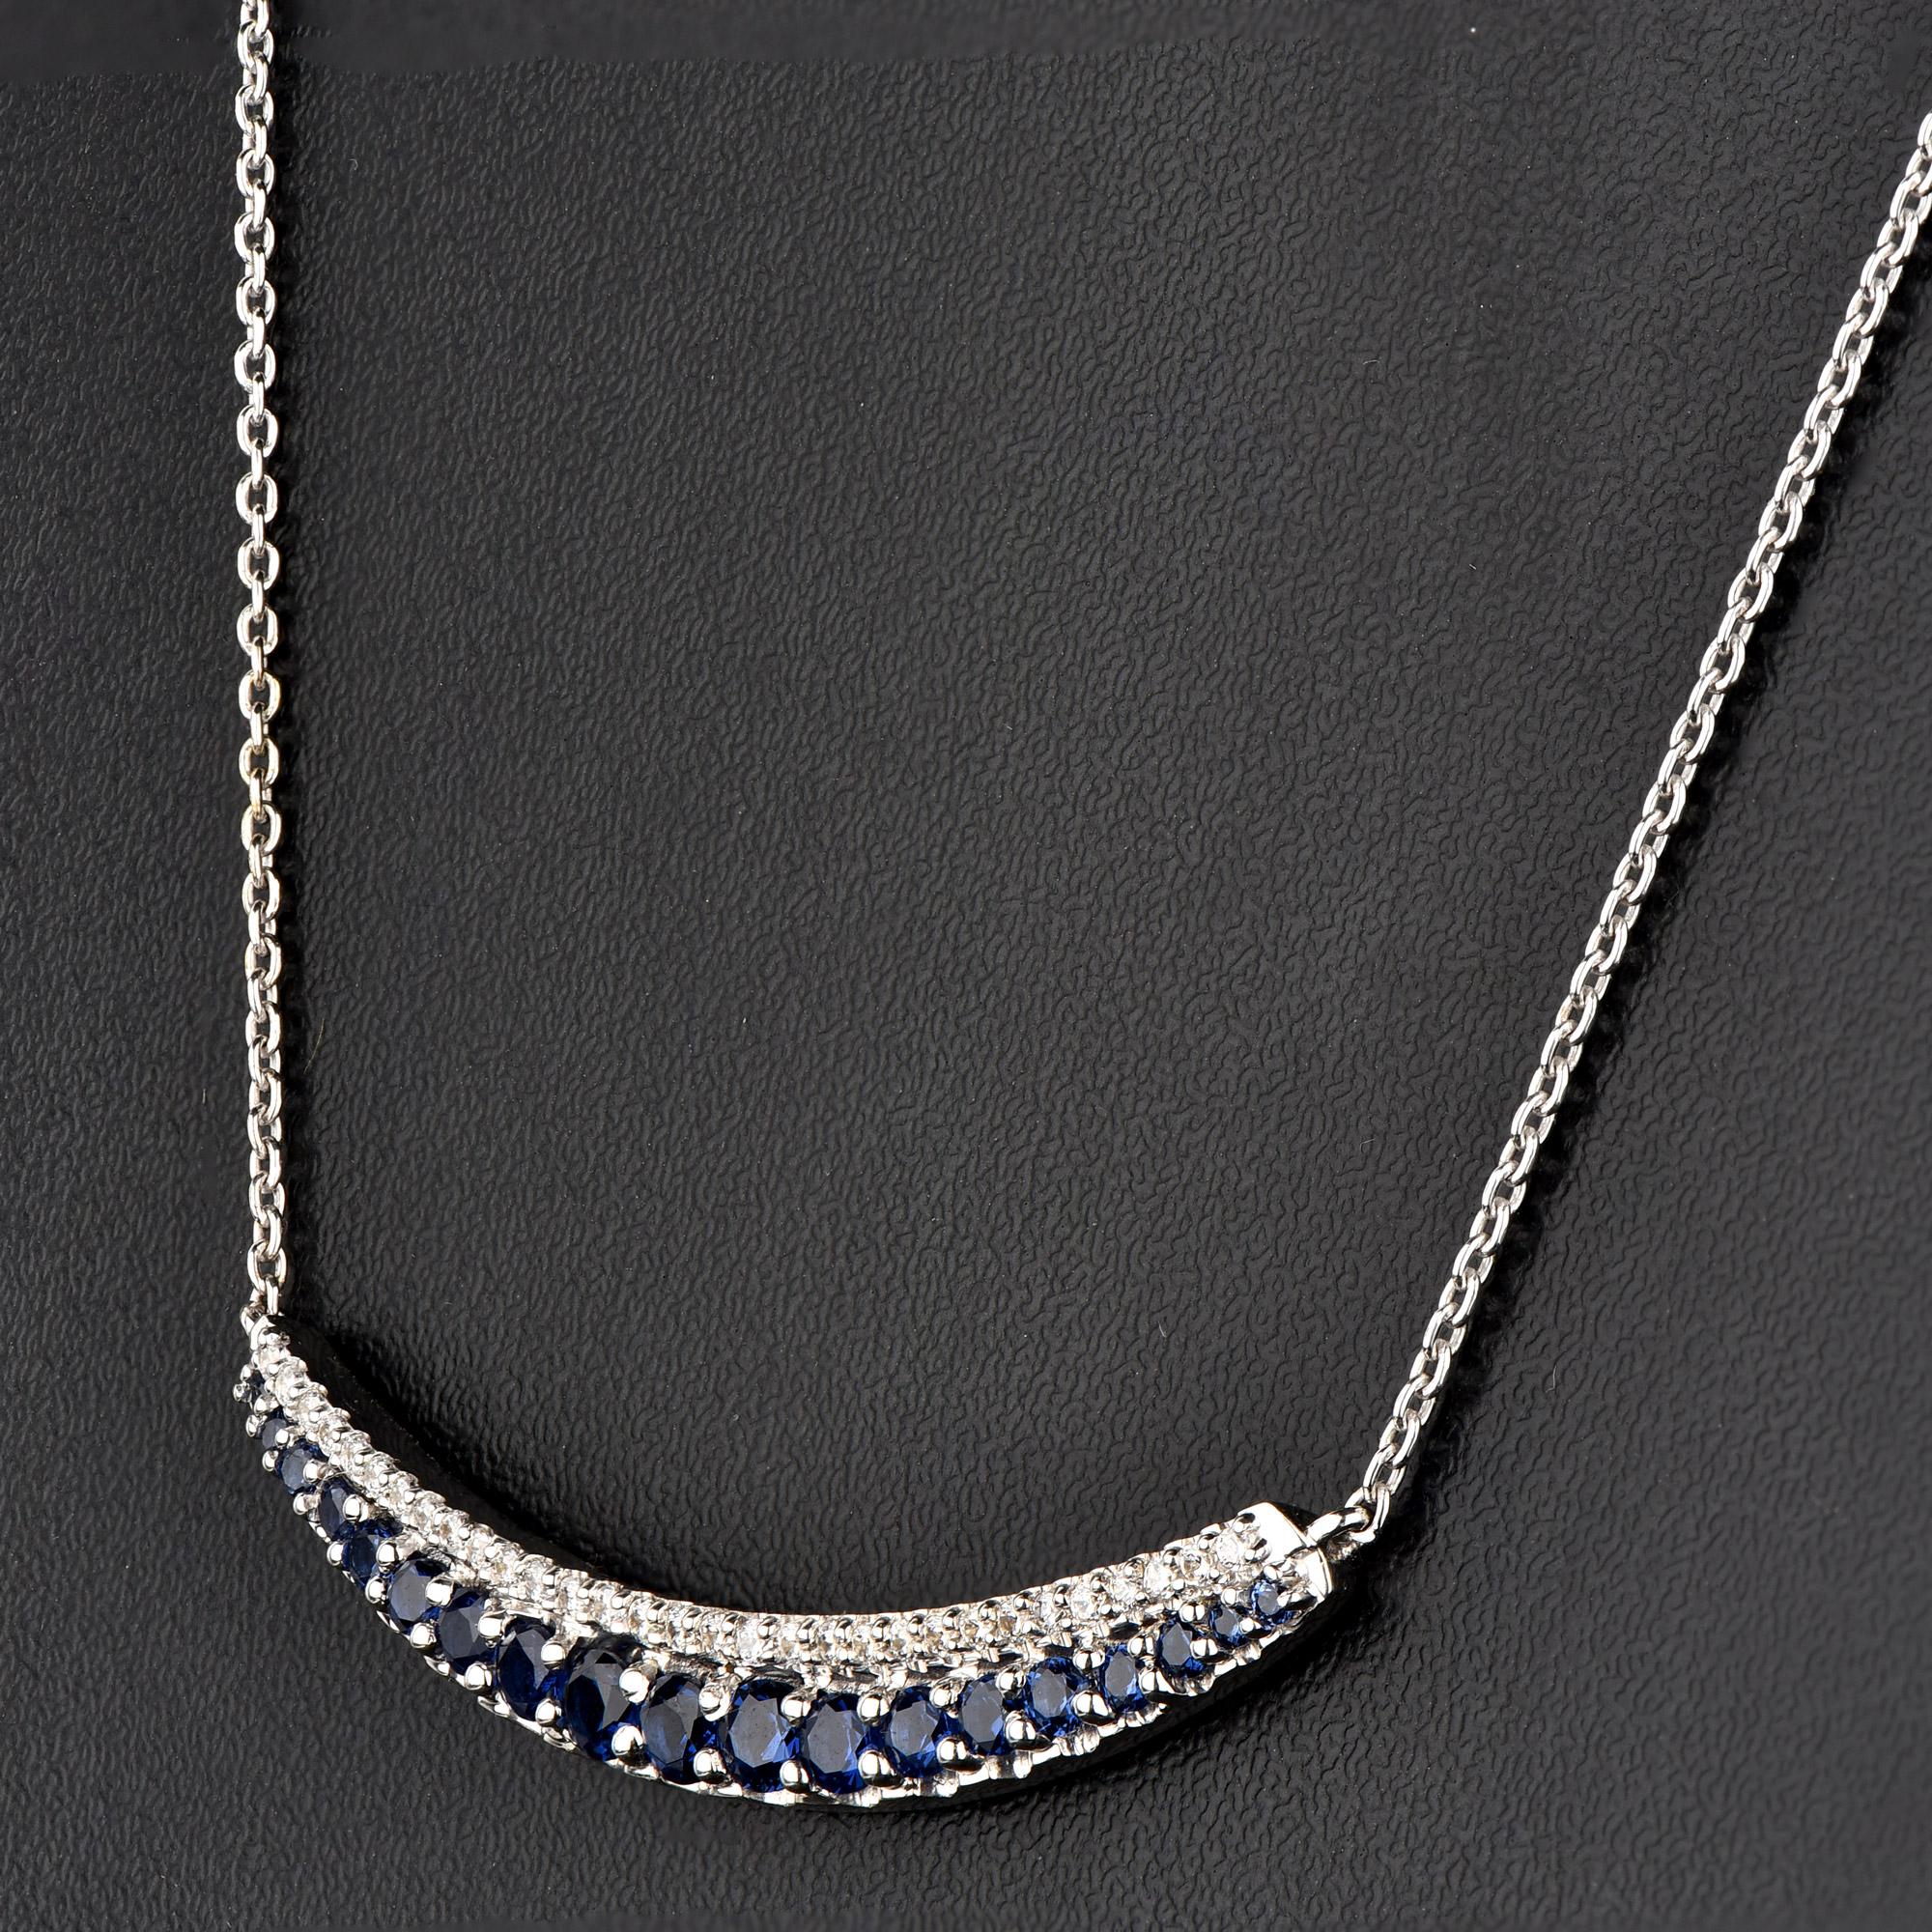 A striking addition when worn on its own, this diamond pendant makes a stunning impression. The pendant is crafted from 14 karat gold in your choice of white, rose, or yellow, and features 31 round white diamond and 19 blue sapphire set in pressure